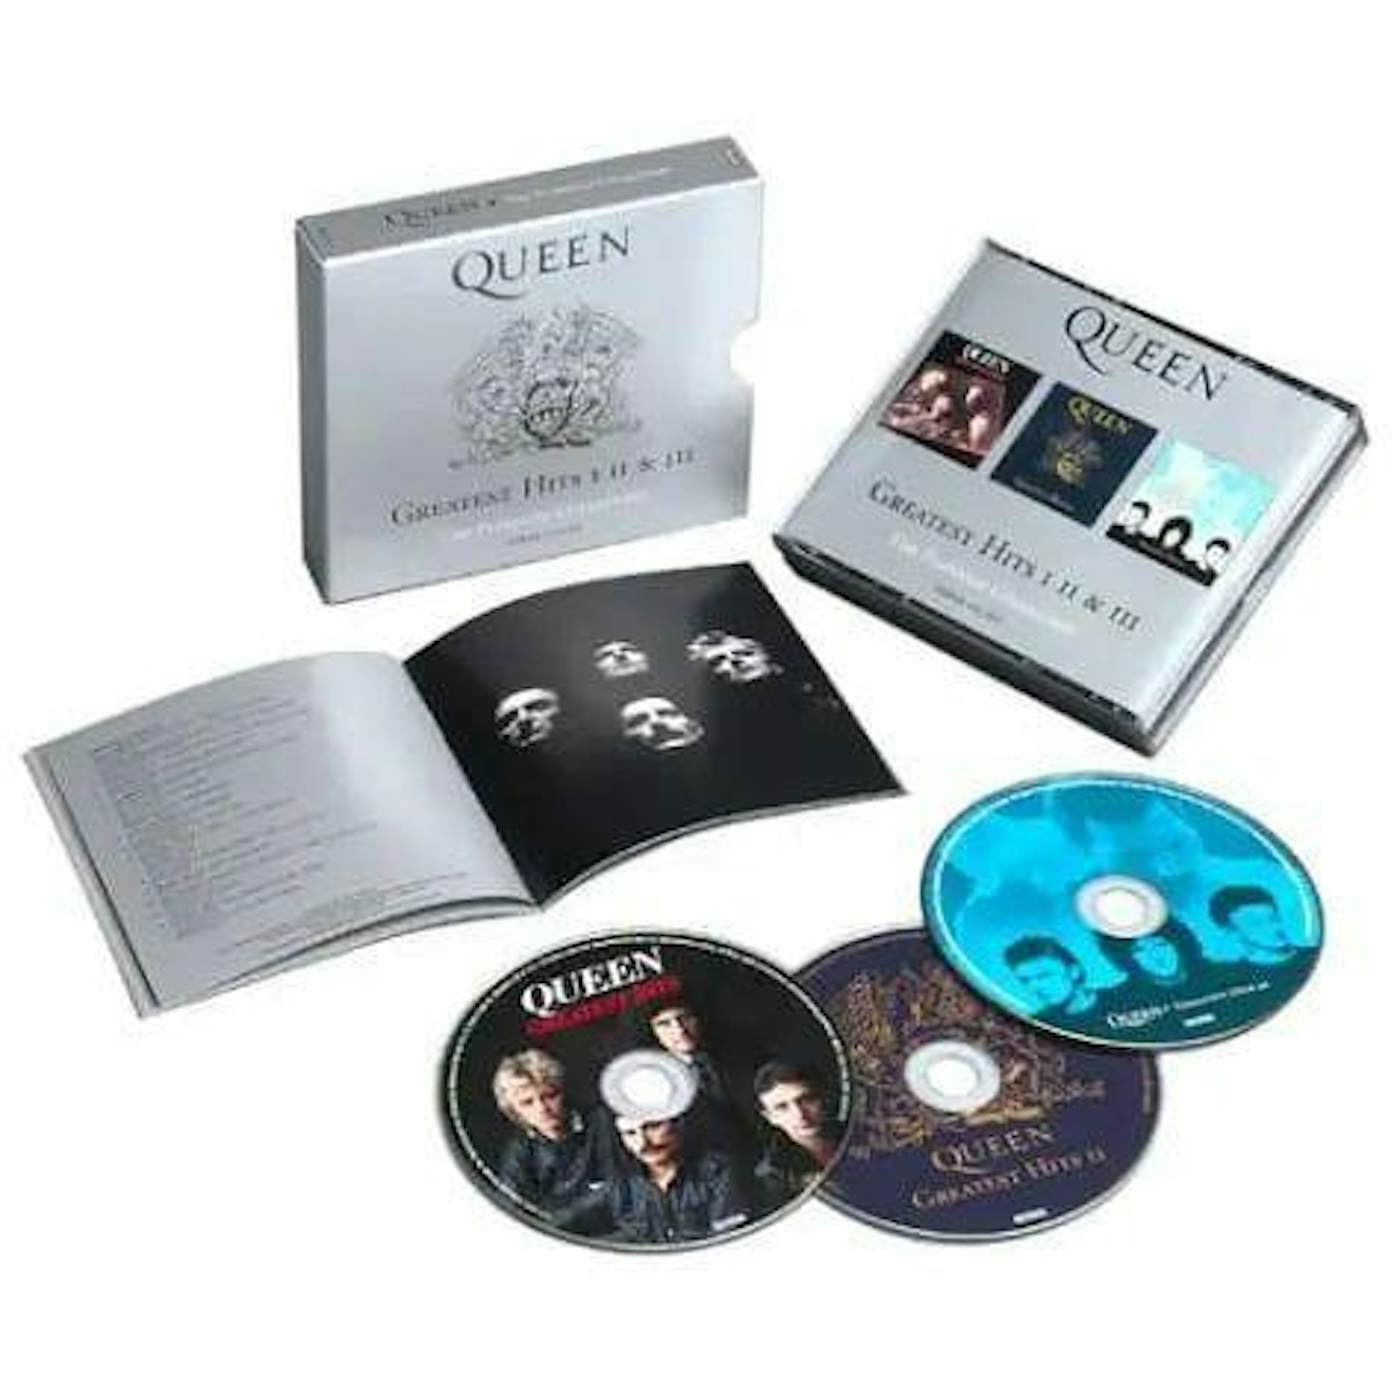 Queen - The Platinum Collection: Greatest Hits I, II & III (180g Vinyl 6LP  Box Set) - Music Direct